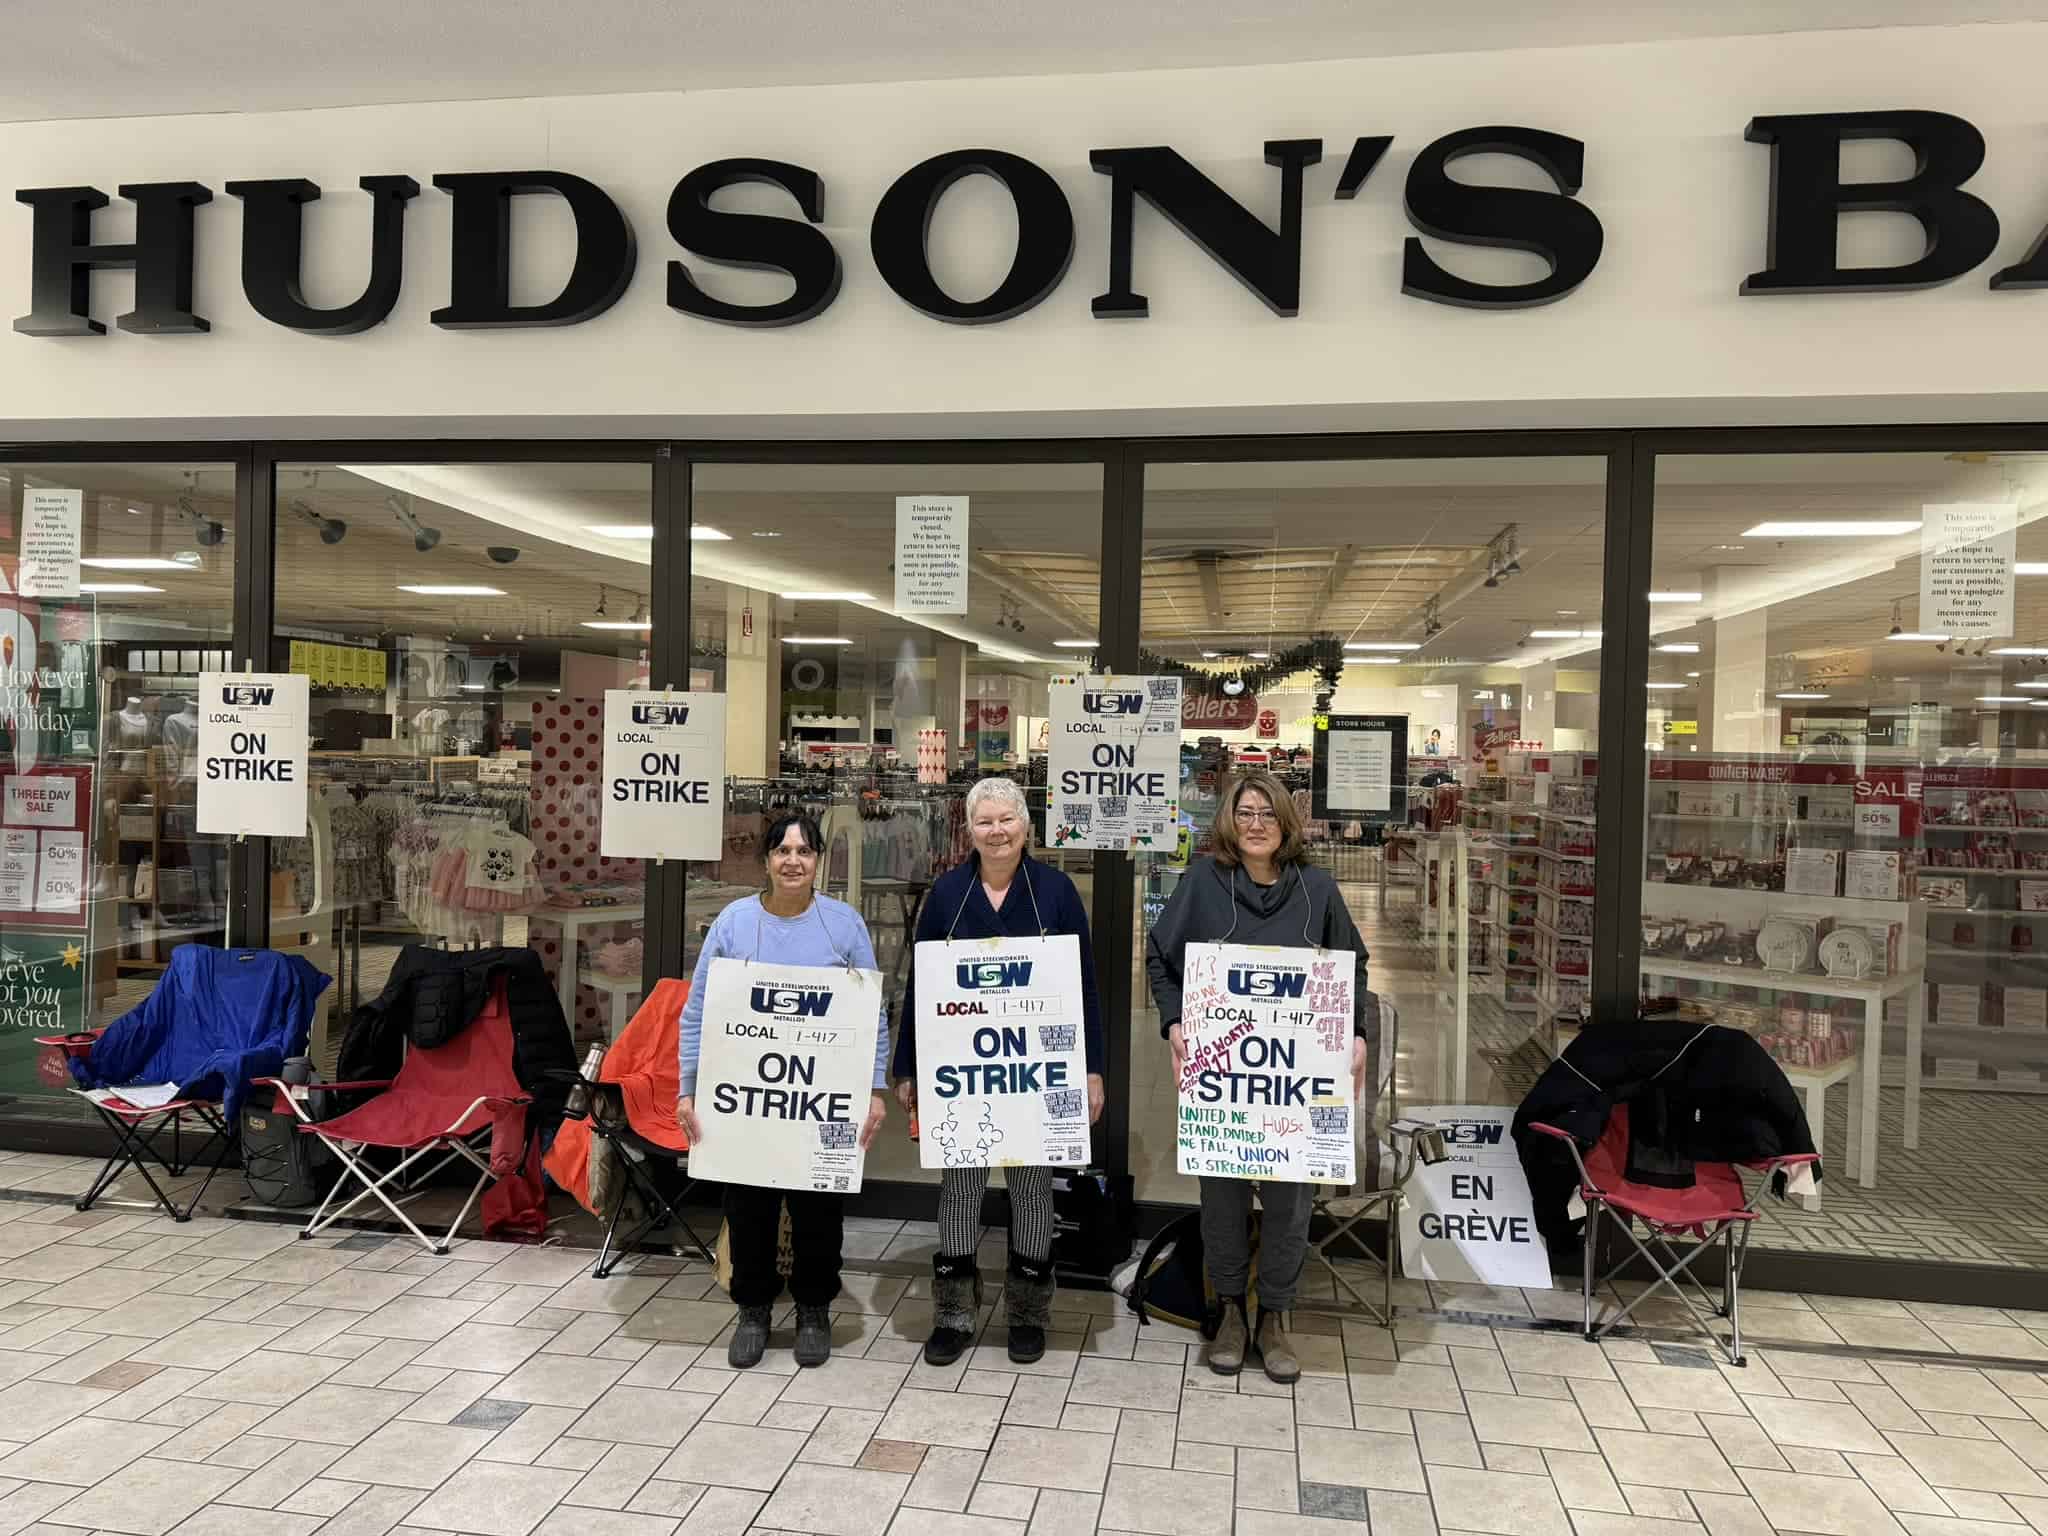 Hudson's Bay to workers: 'Go on strike forever, it's not going to